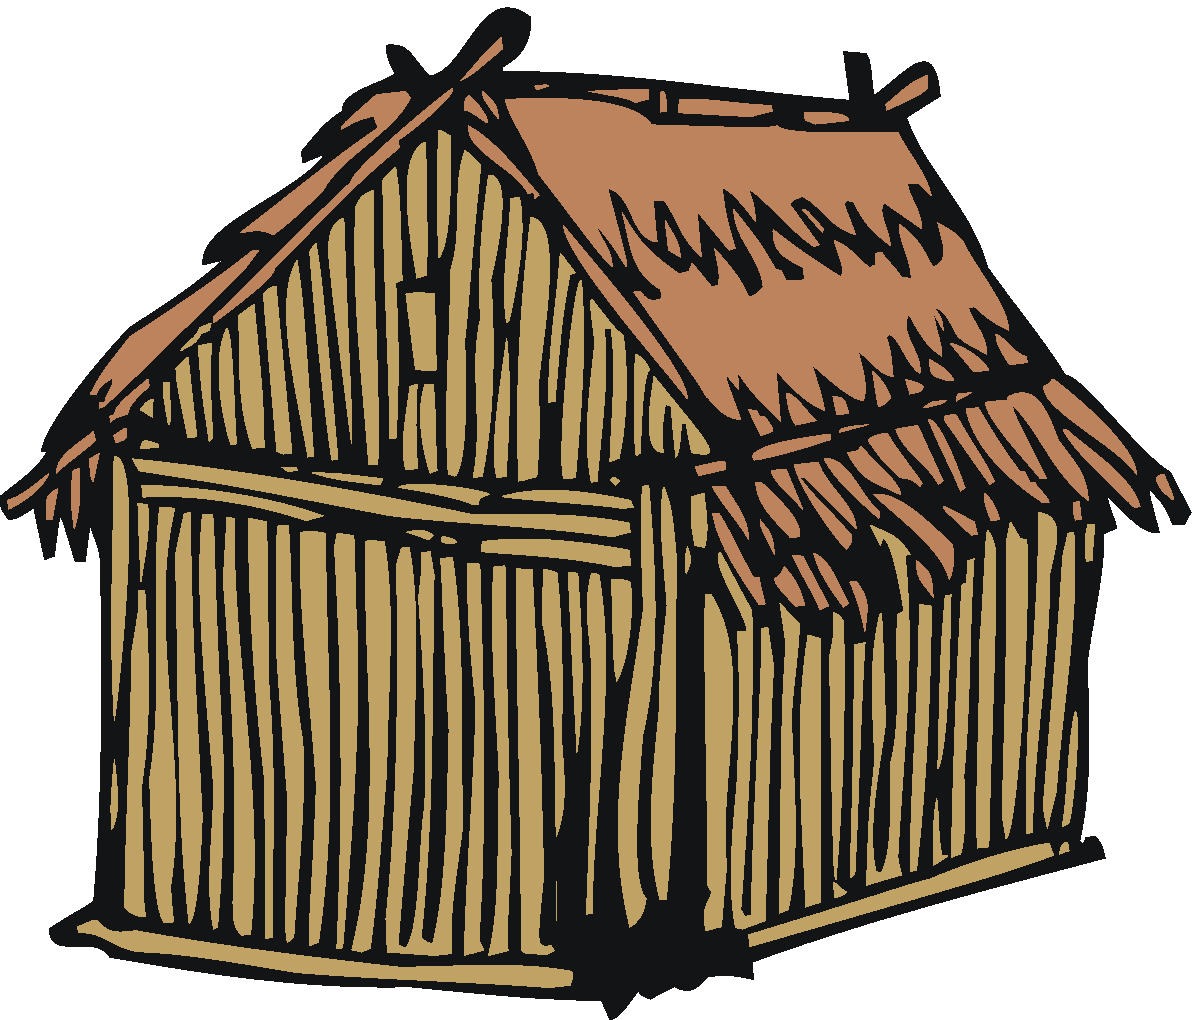 wood house clipart - photo #42